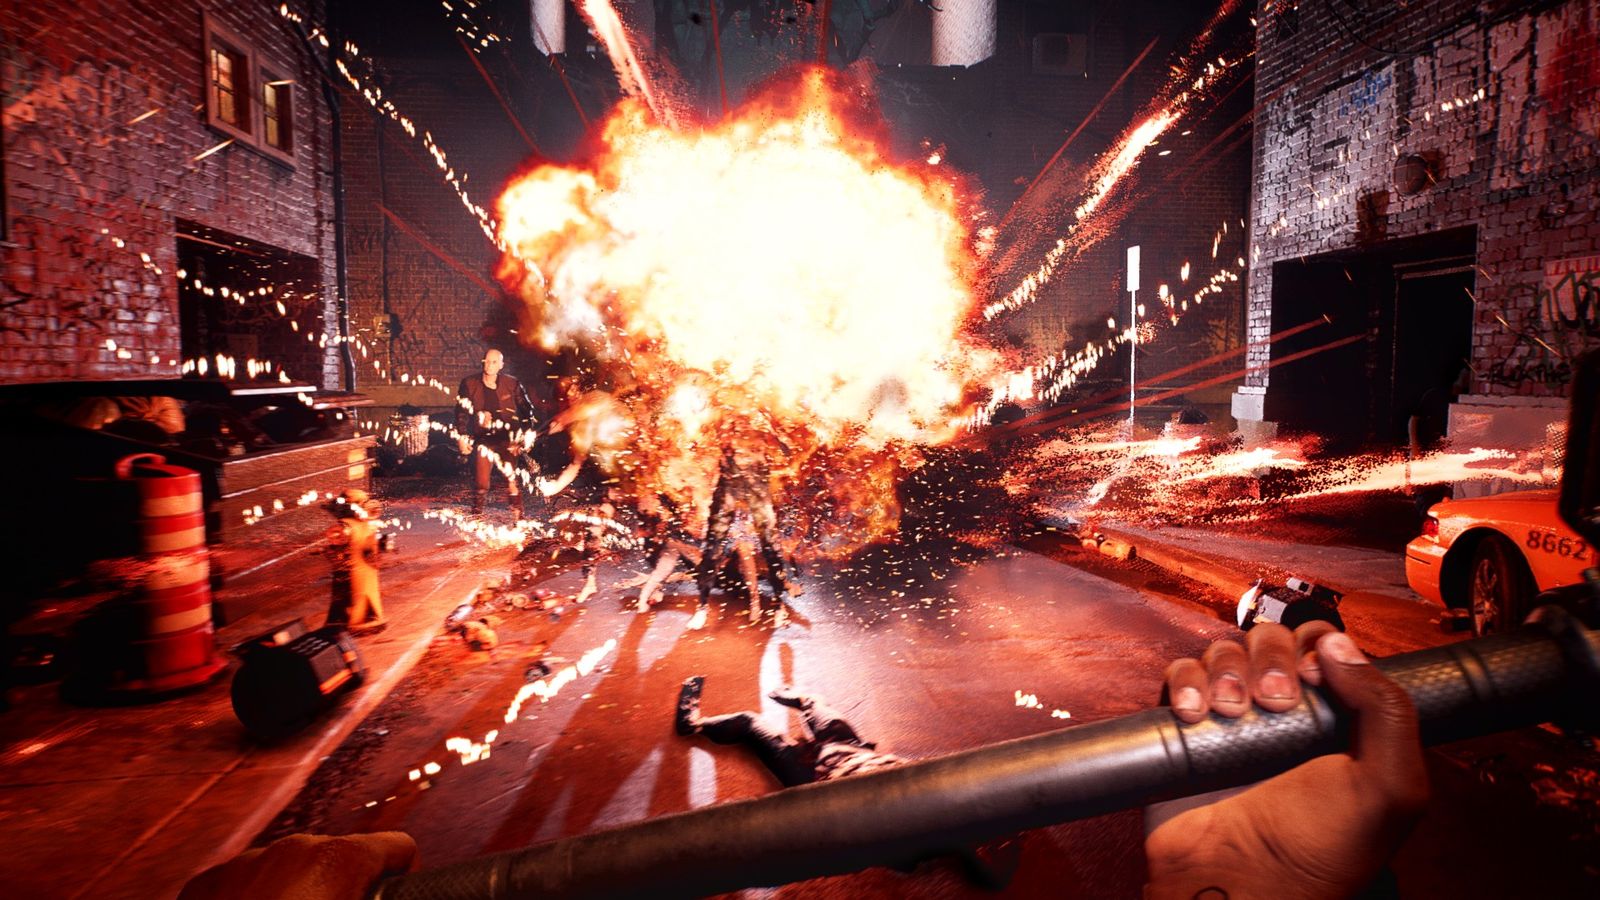 Screenshot of Dead Island 2 player creating explosion near zombies